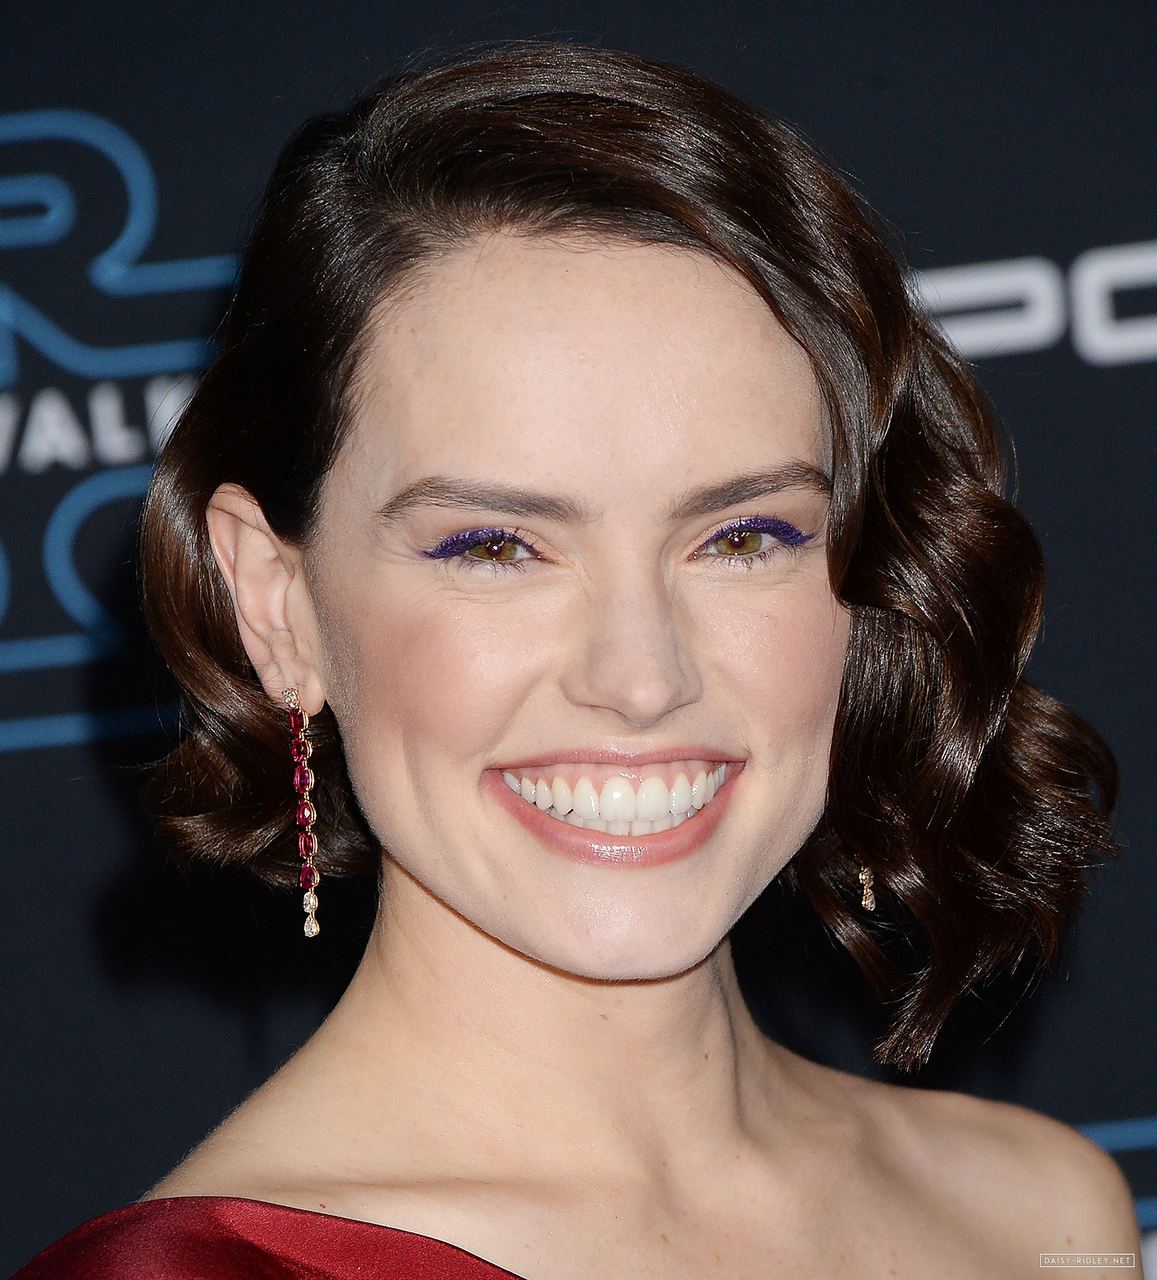 Daisy Ridley Face Was Made To Be Used NSFW